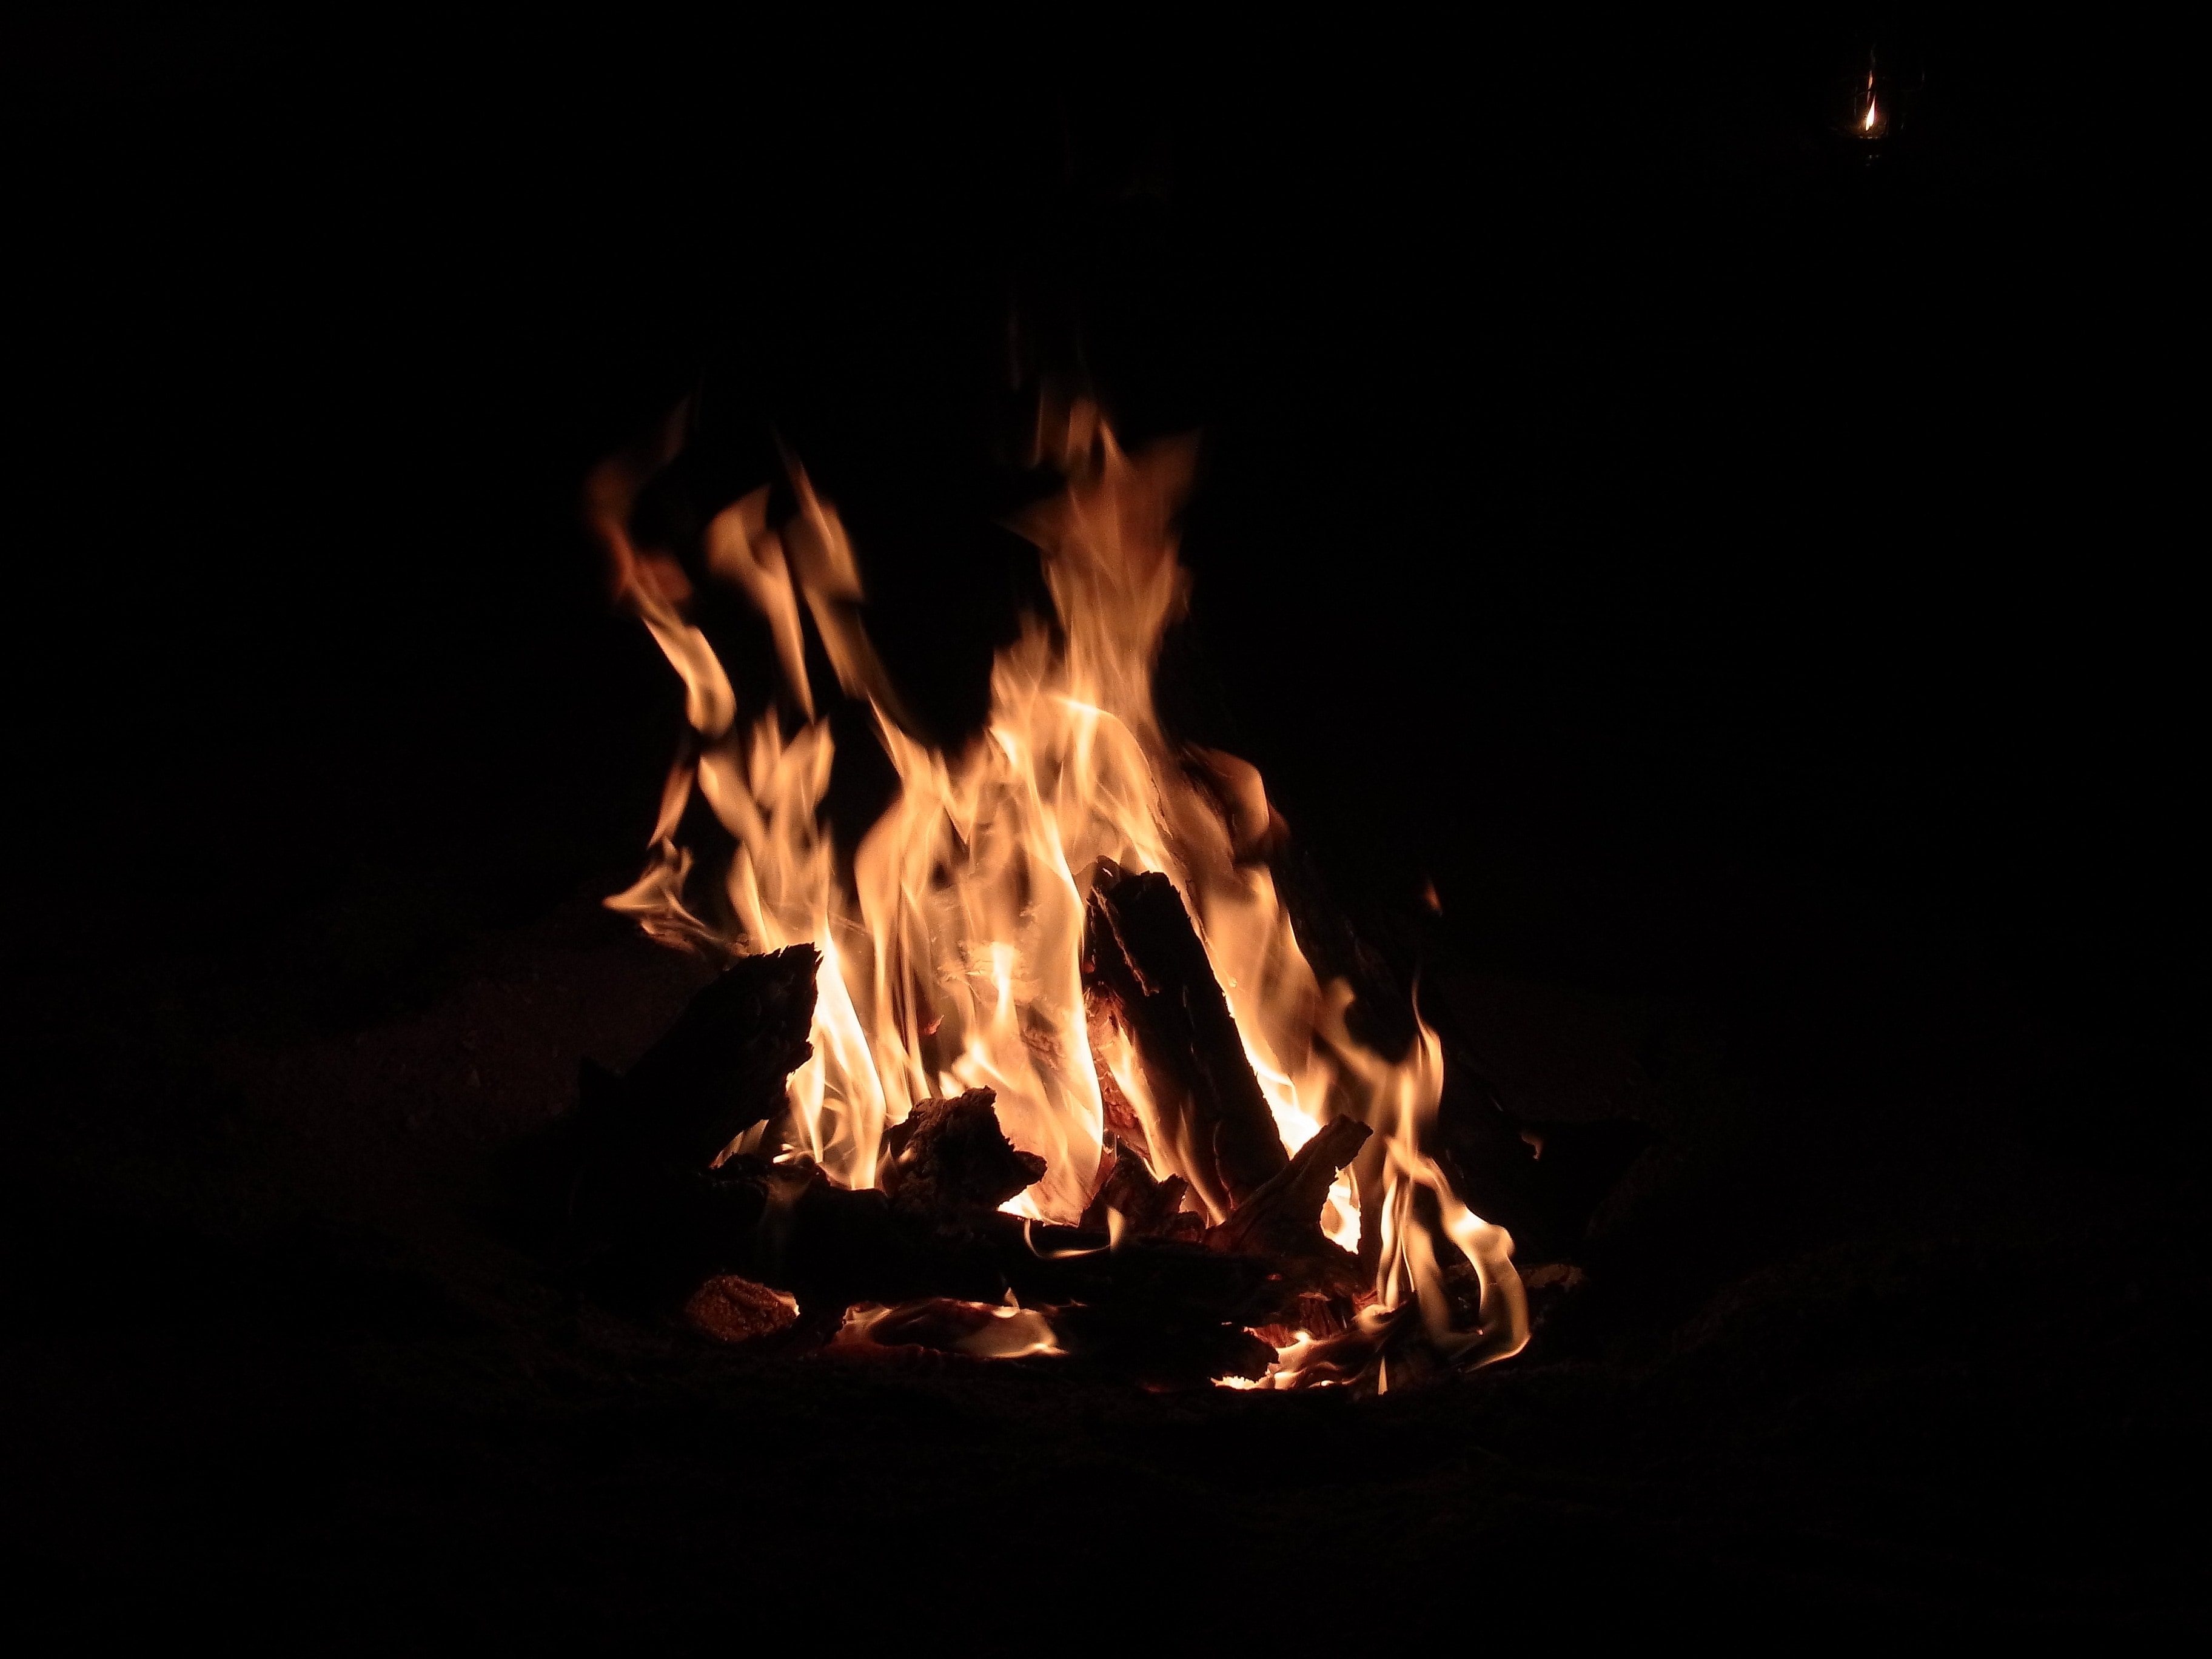 Campfire, Embers, Fire, Flame, flame, burning